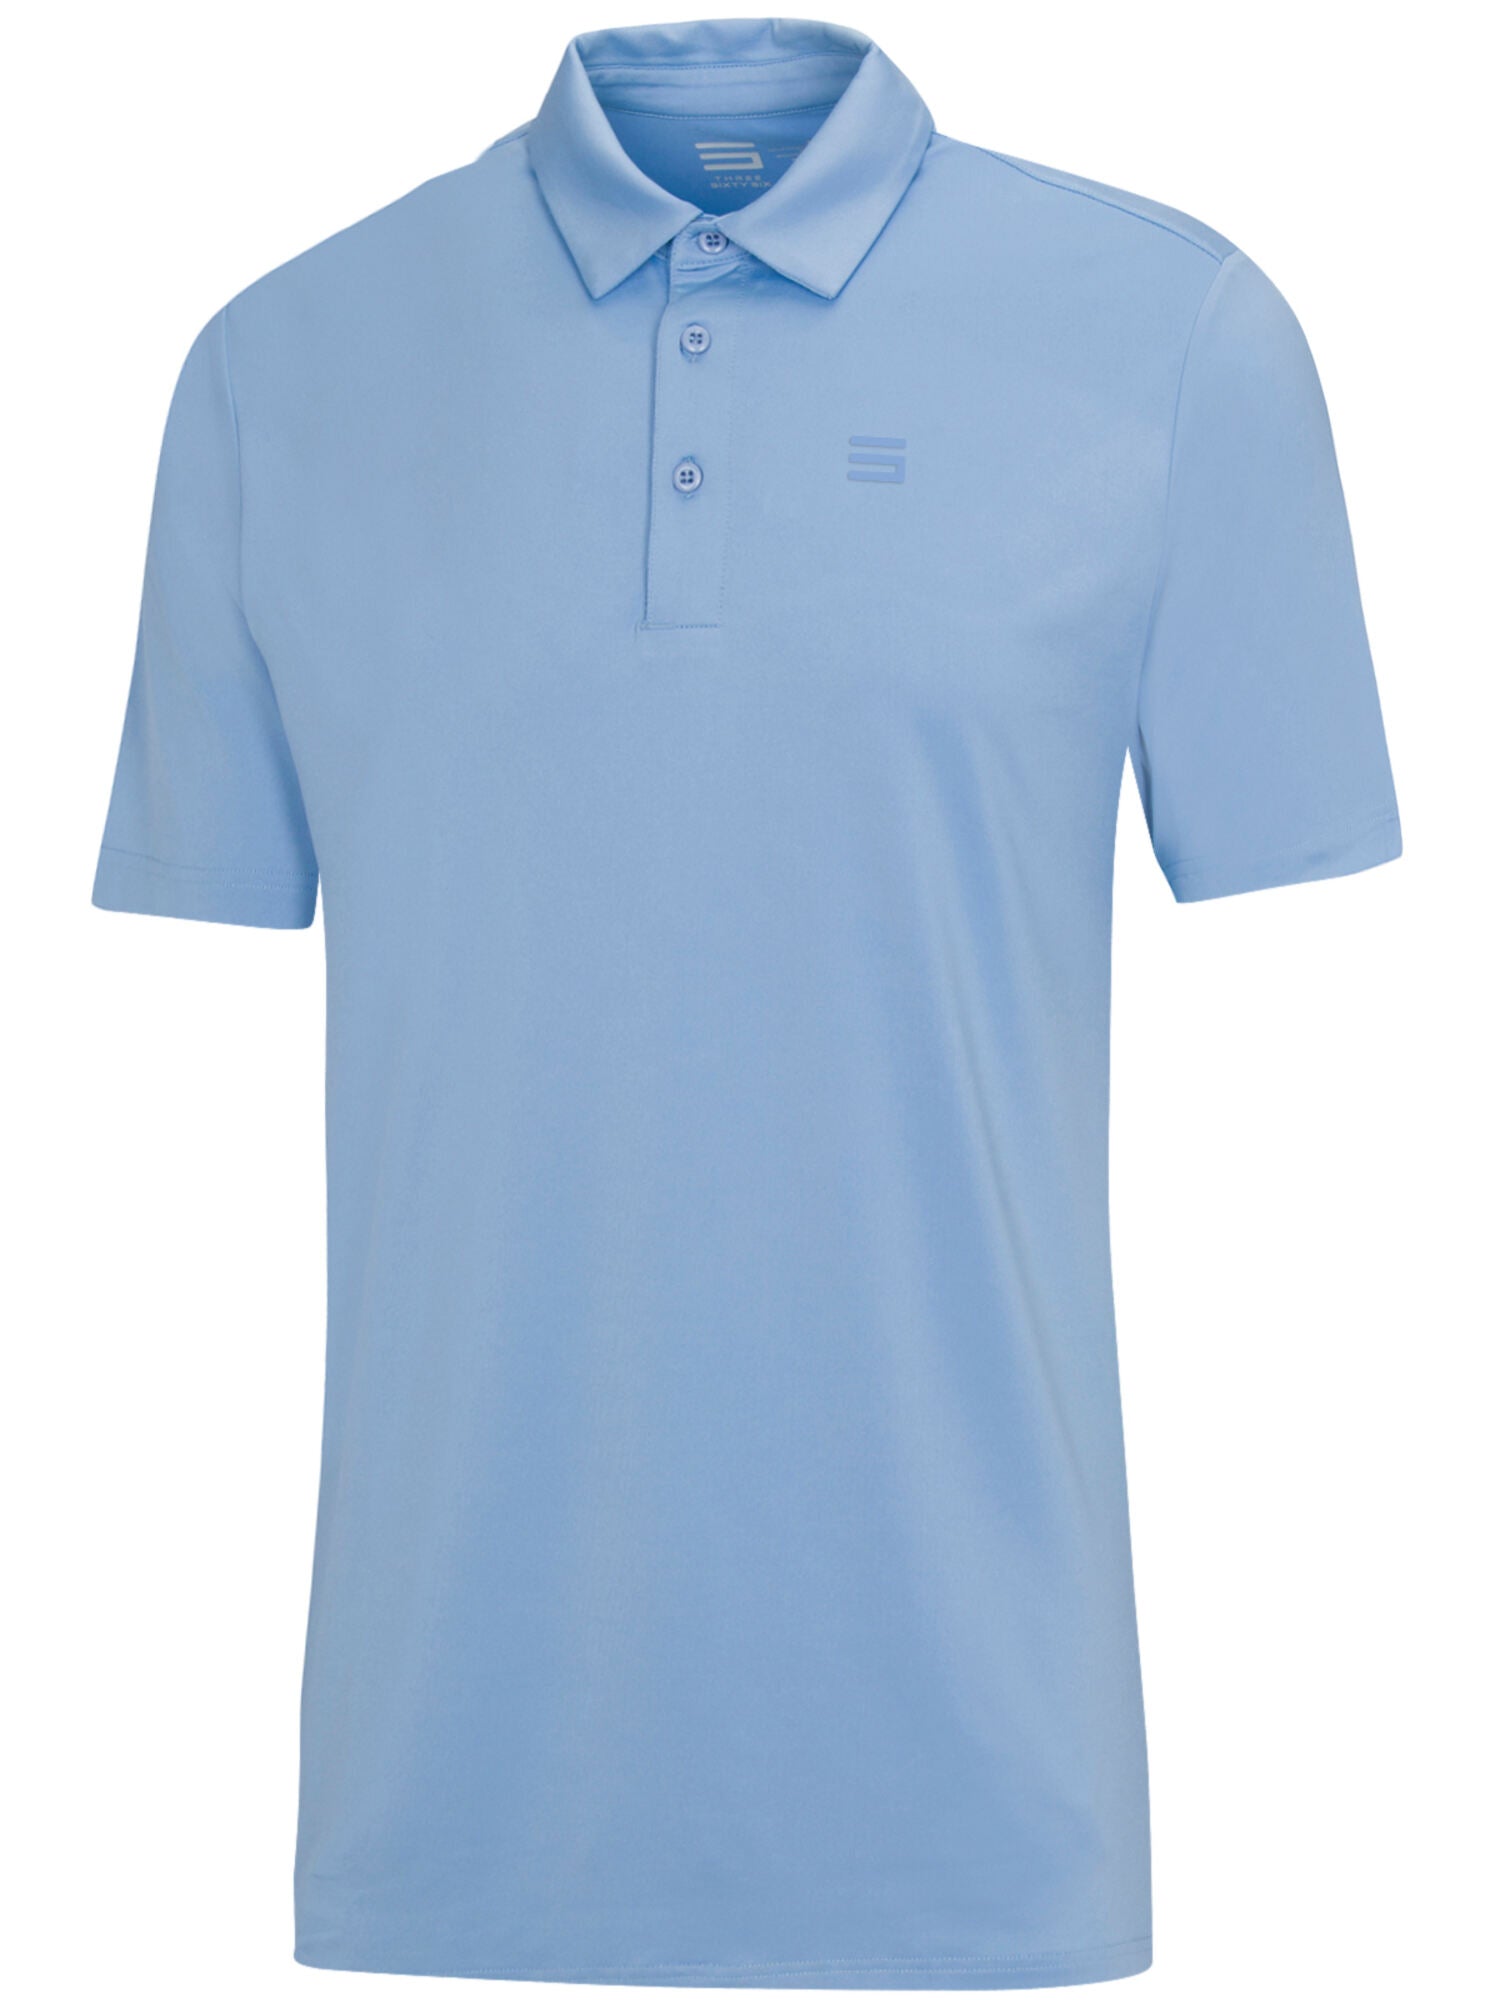 Original TSS Dry-Fit Golf Polo - Additional Colors